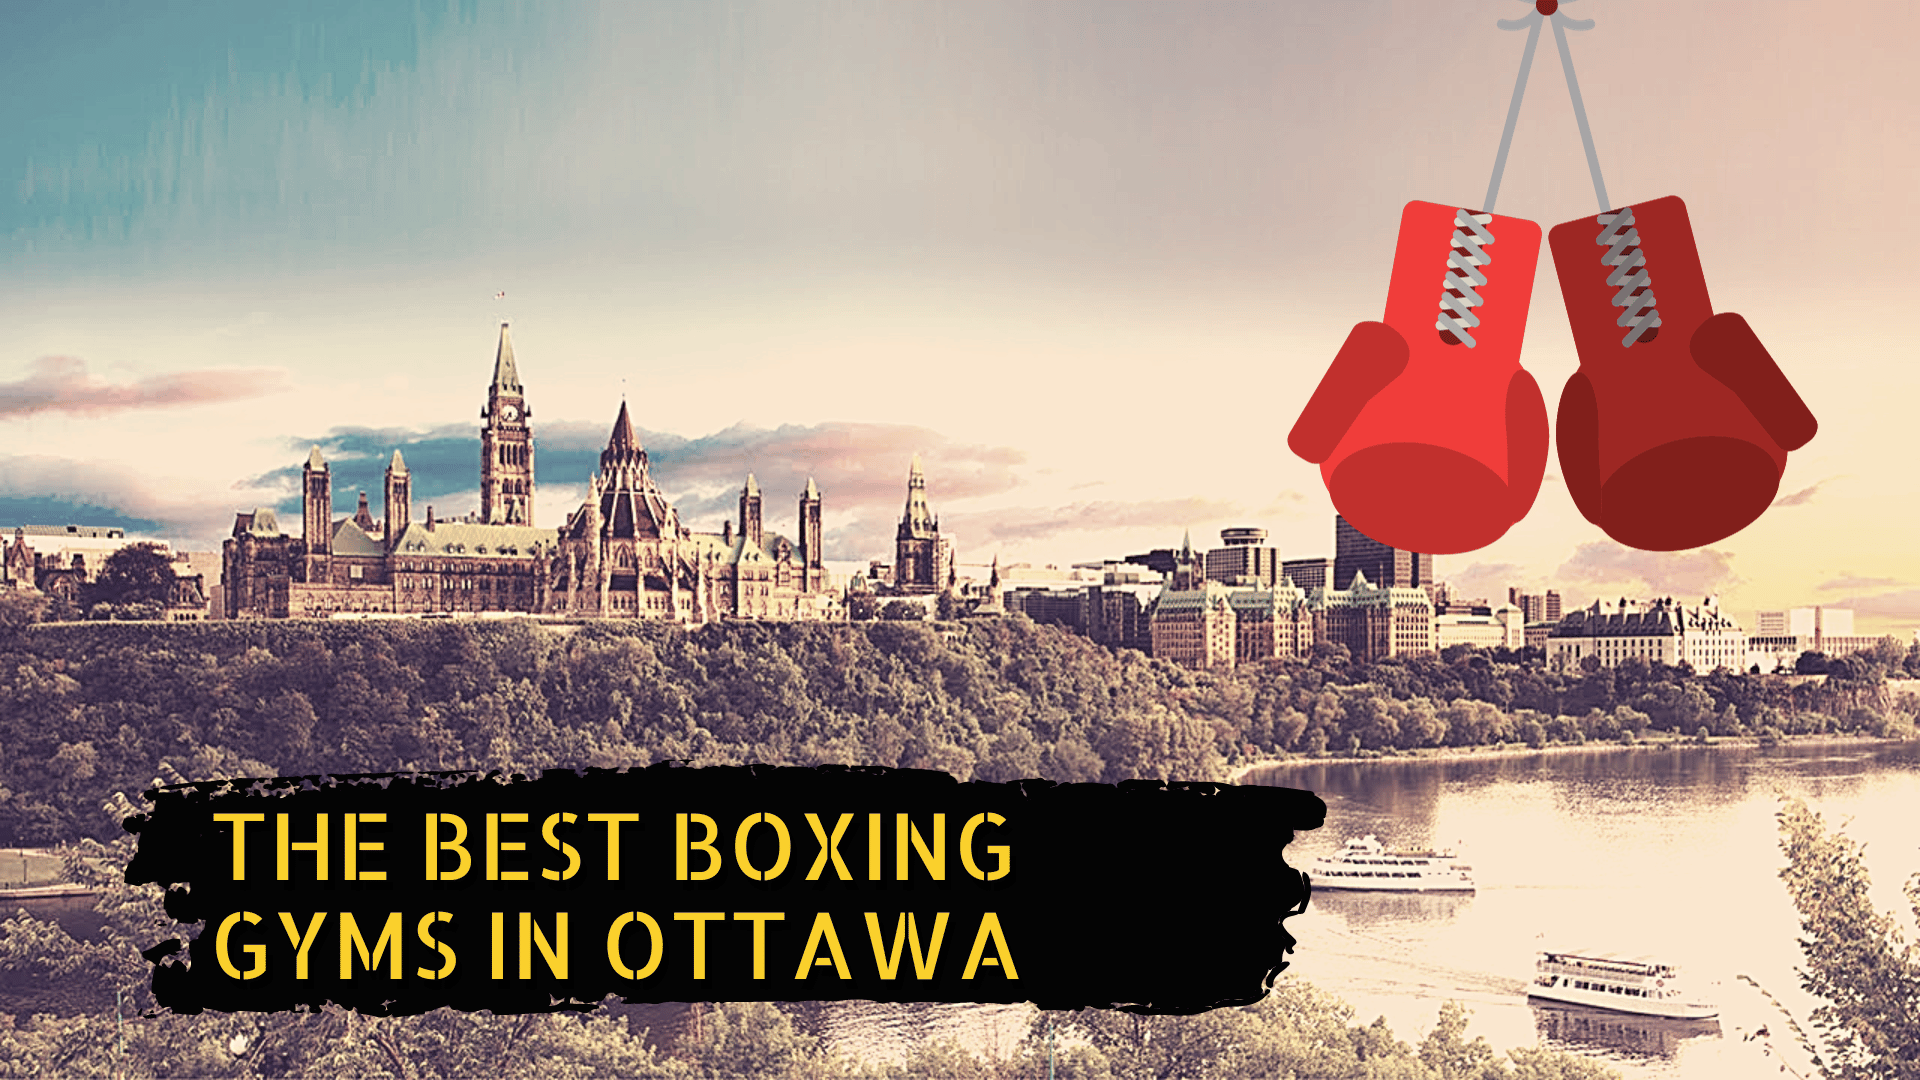 Ottawa skyline, some boxing gloves, and a the title the best boxing gyms in Ottawa